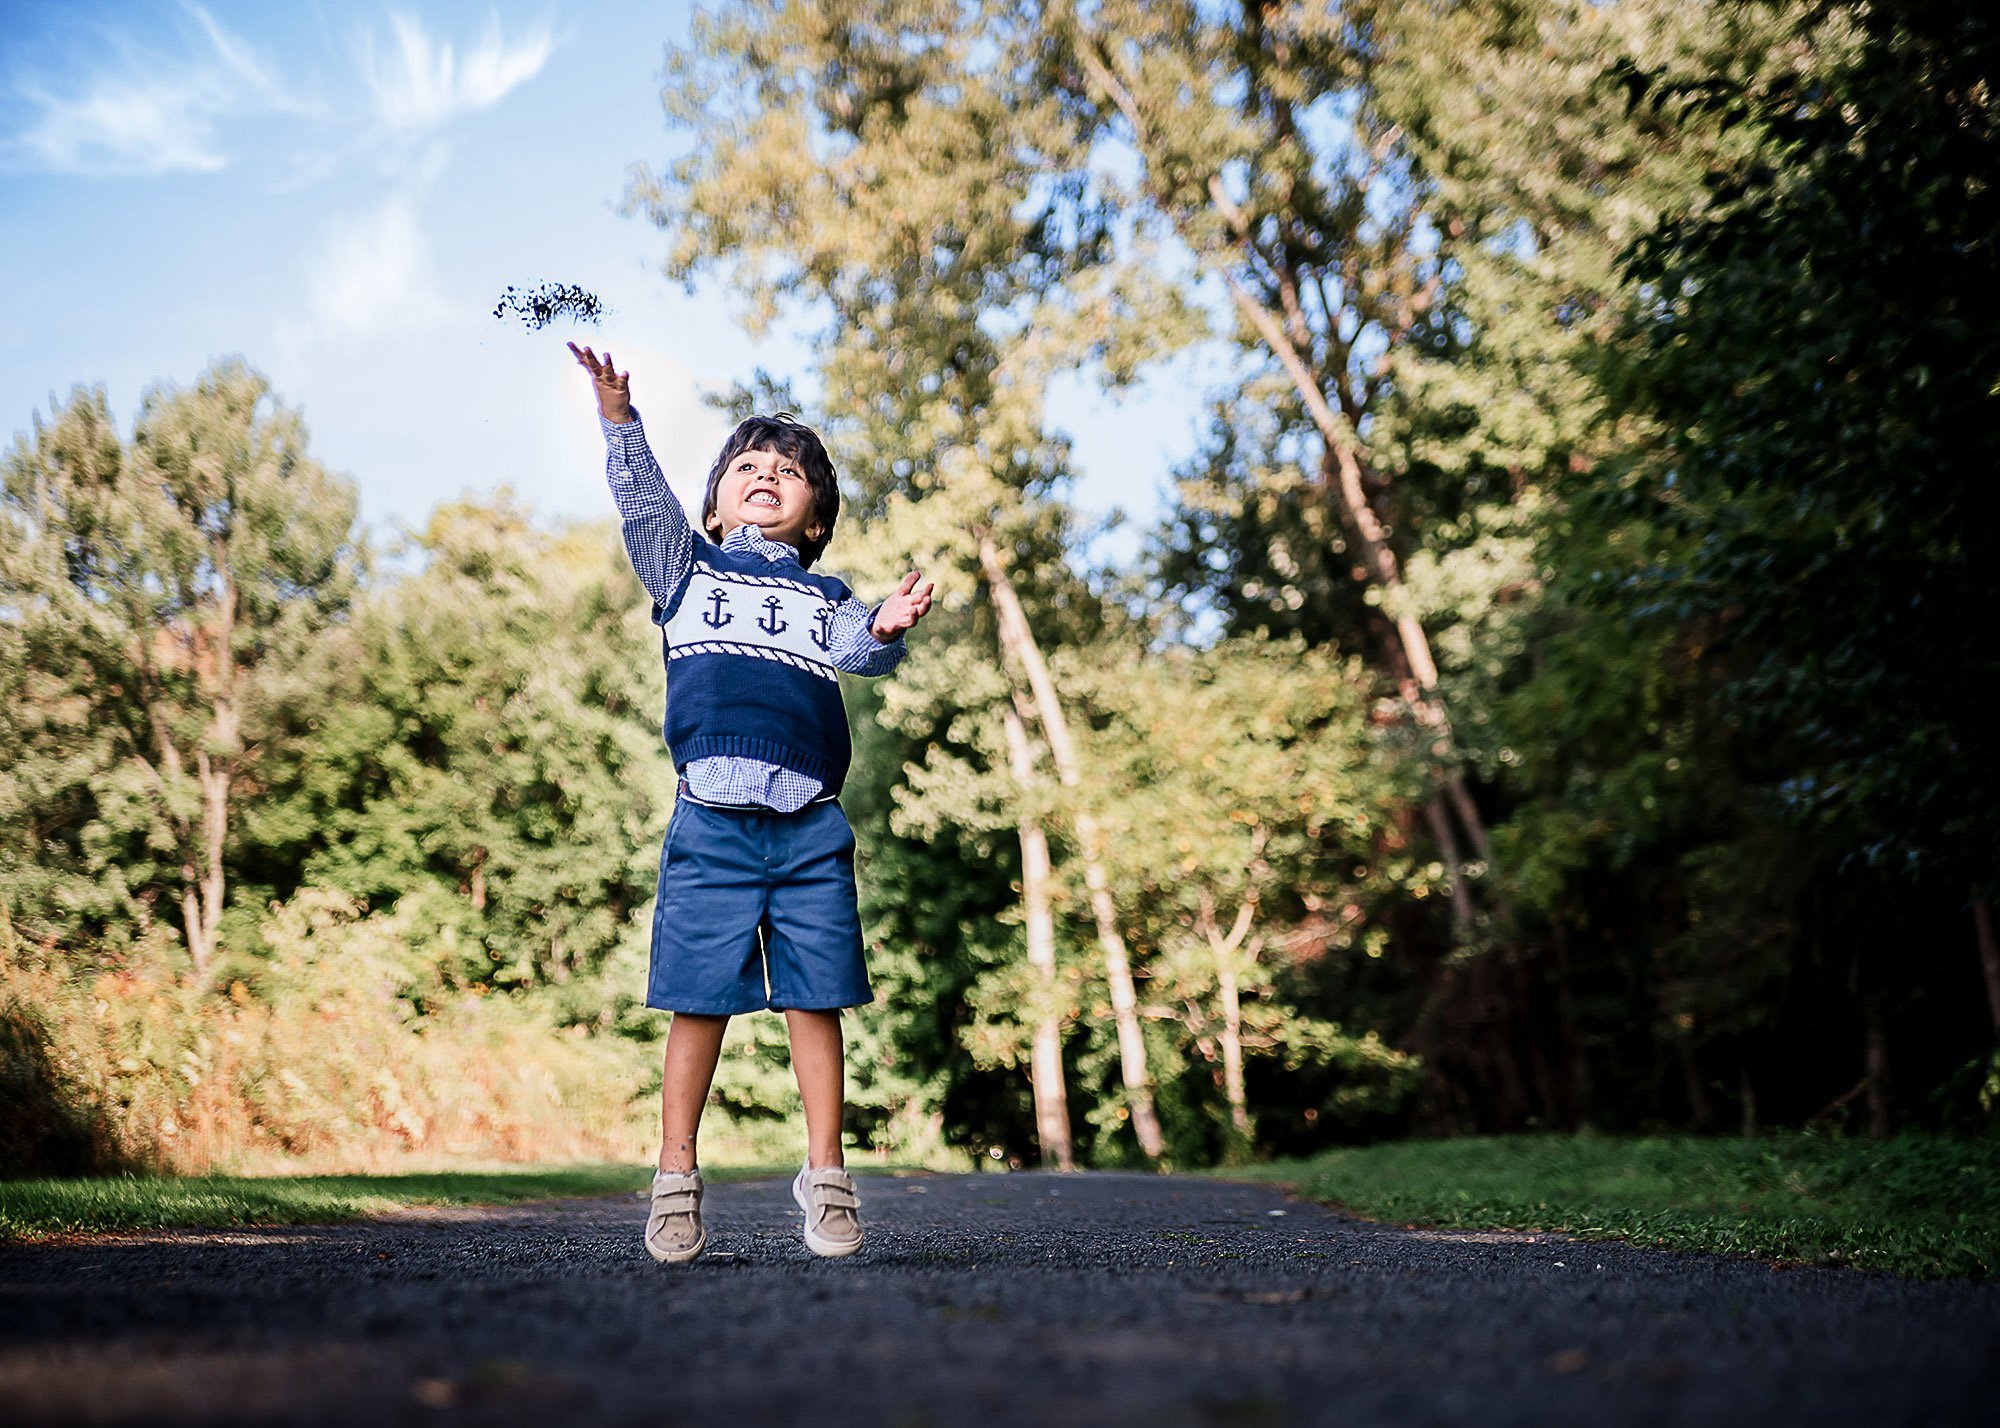 little boy excitedly throwing small rocks into the air outside